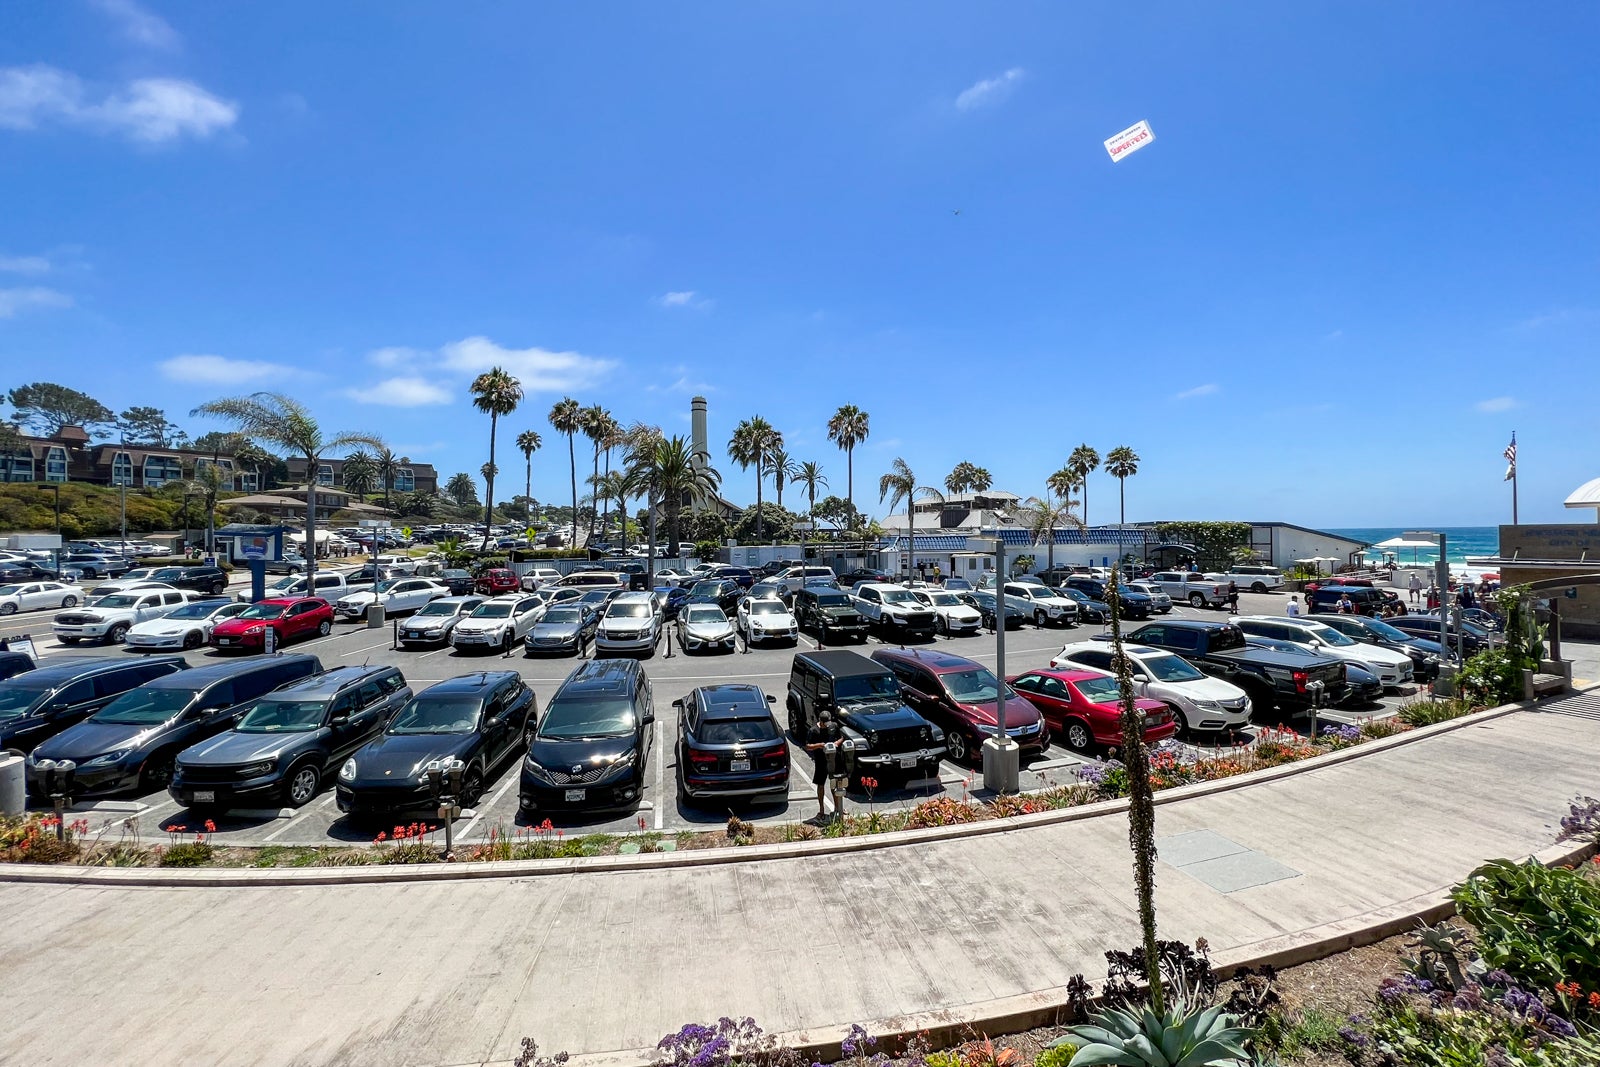 A parking lot filled with cars with palm trees in the background